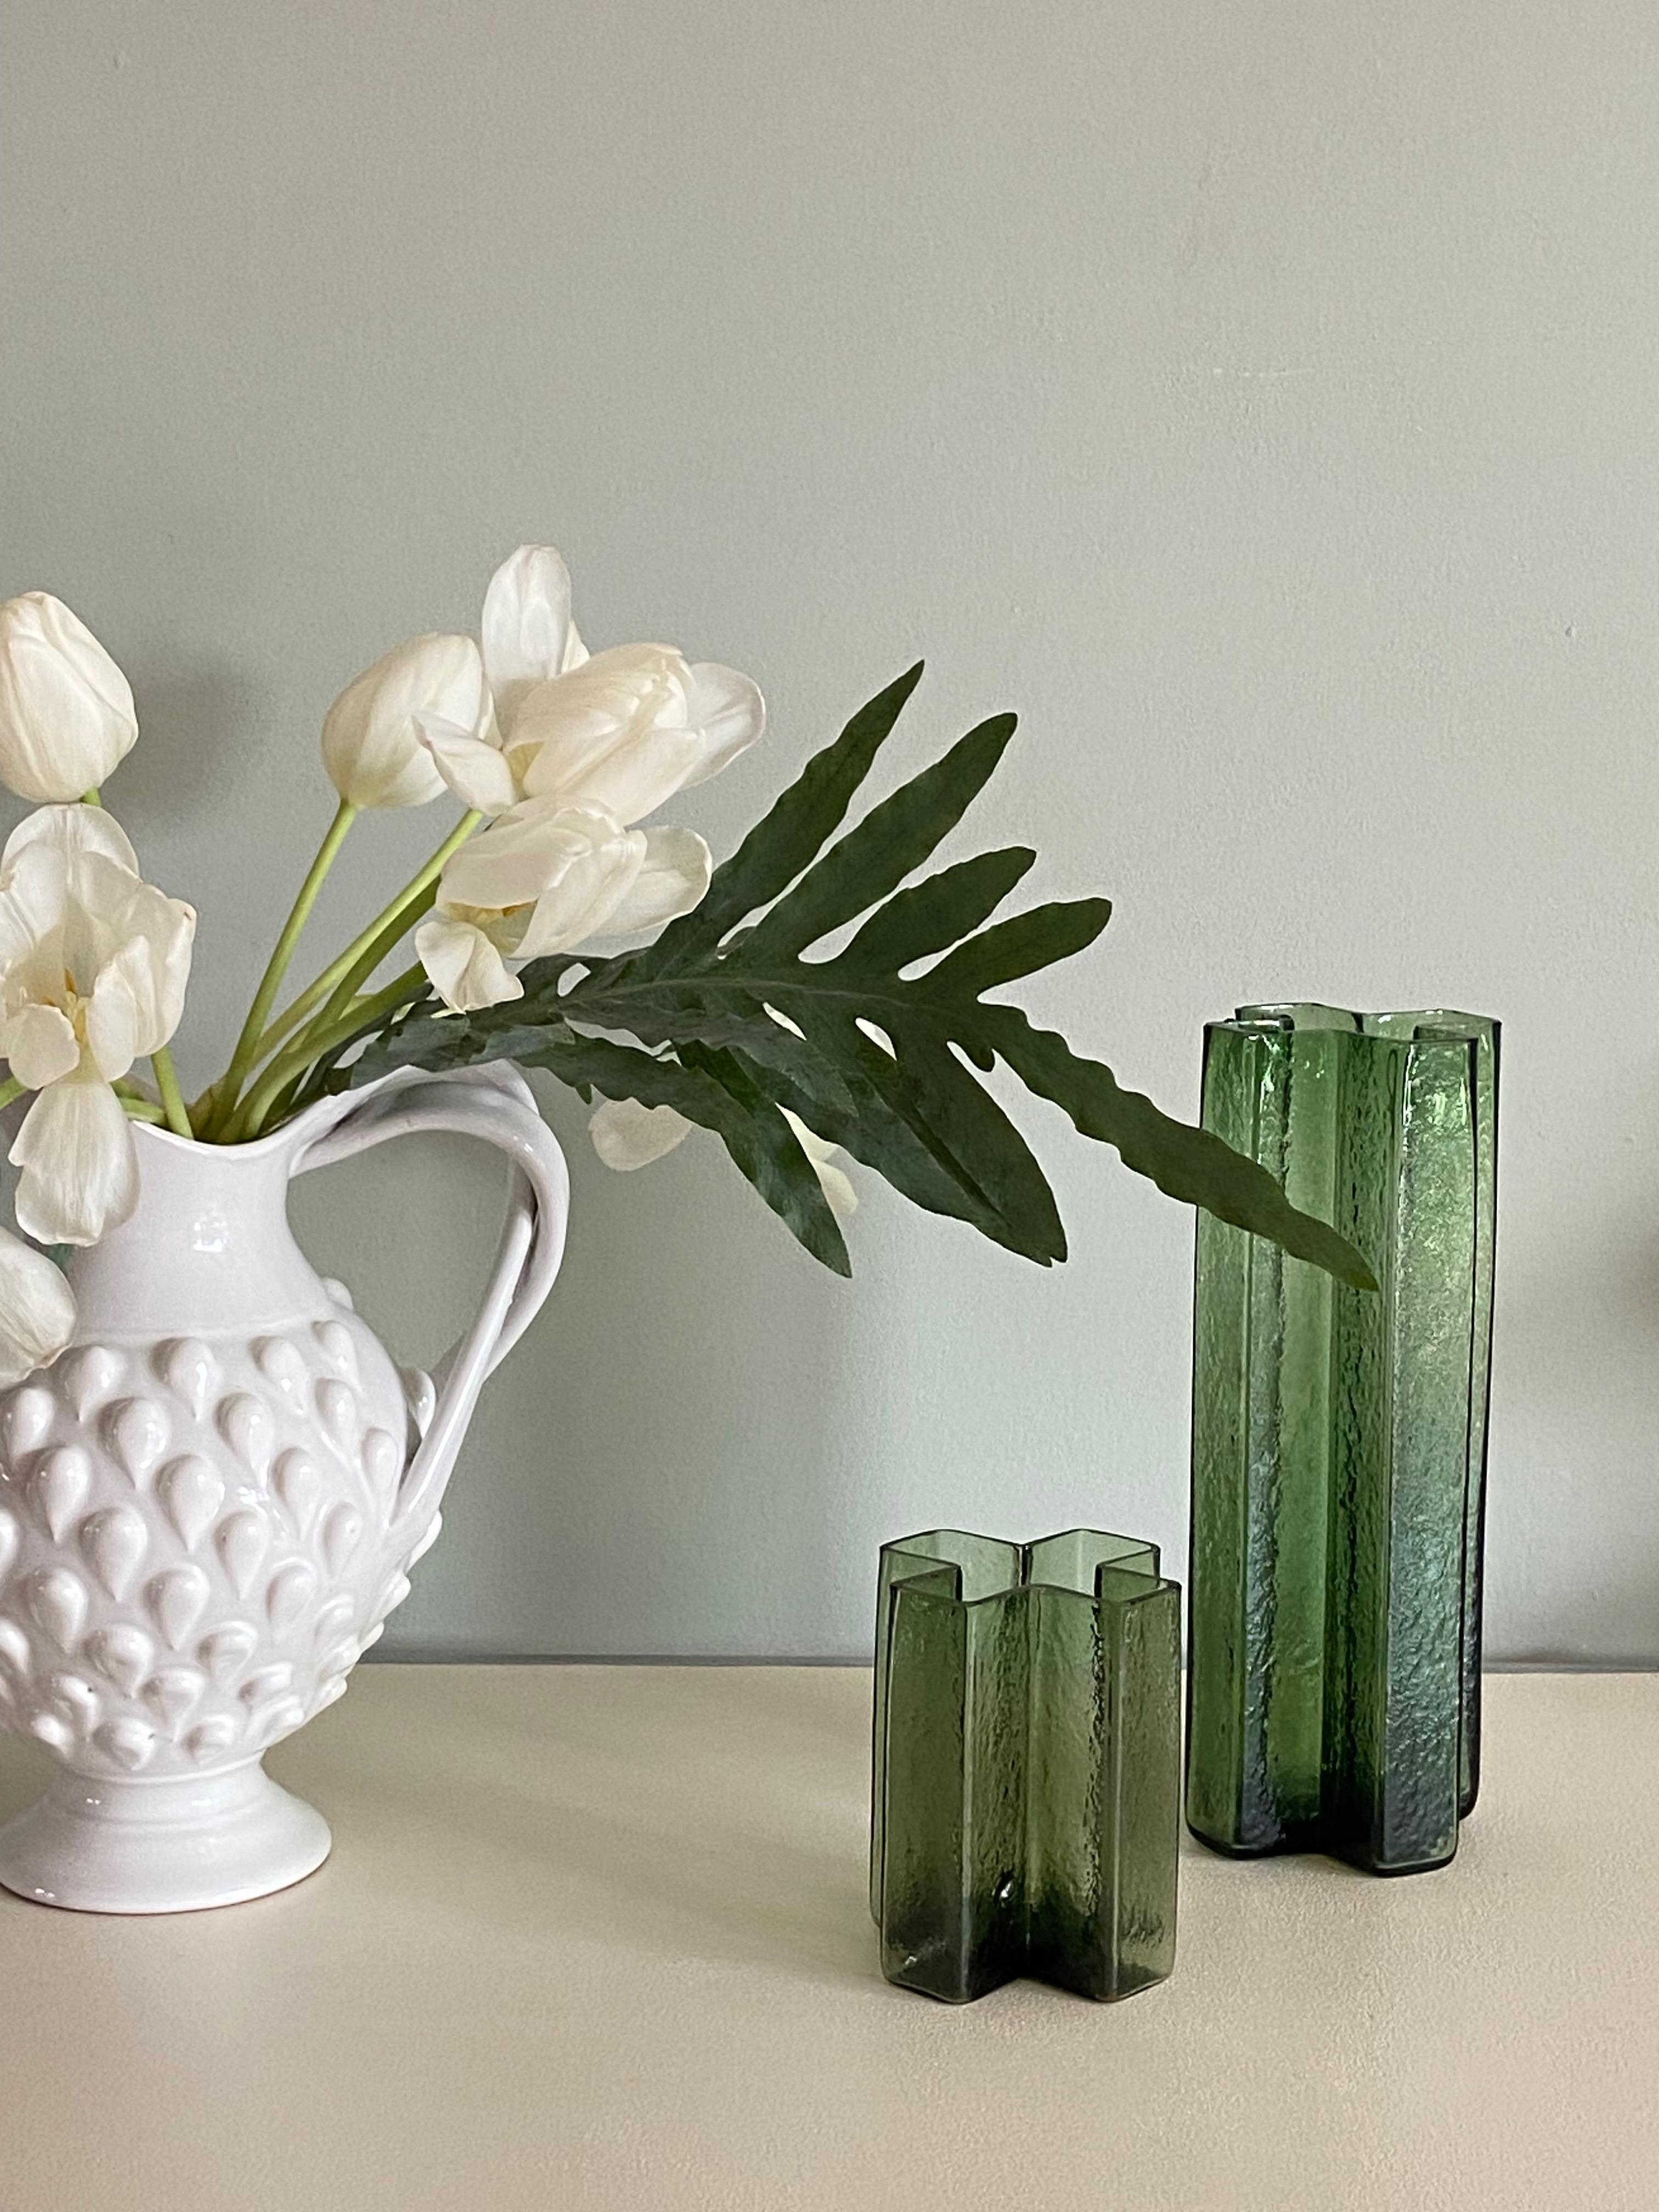 Nice set of two BODIL KJÆR cross vaeses by Gullaskruf 1960s Made in Sweden. Green glass, one vase with a small chip at the rim.
Size small one 9x9cm height 12cm.
Large one 10x10cm height 27cm.